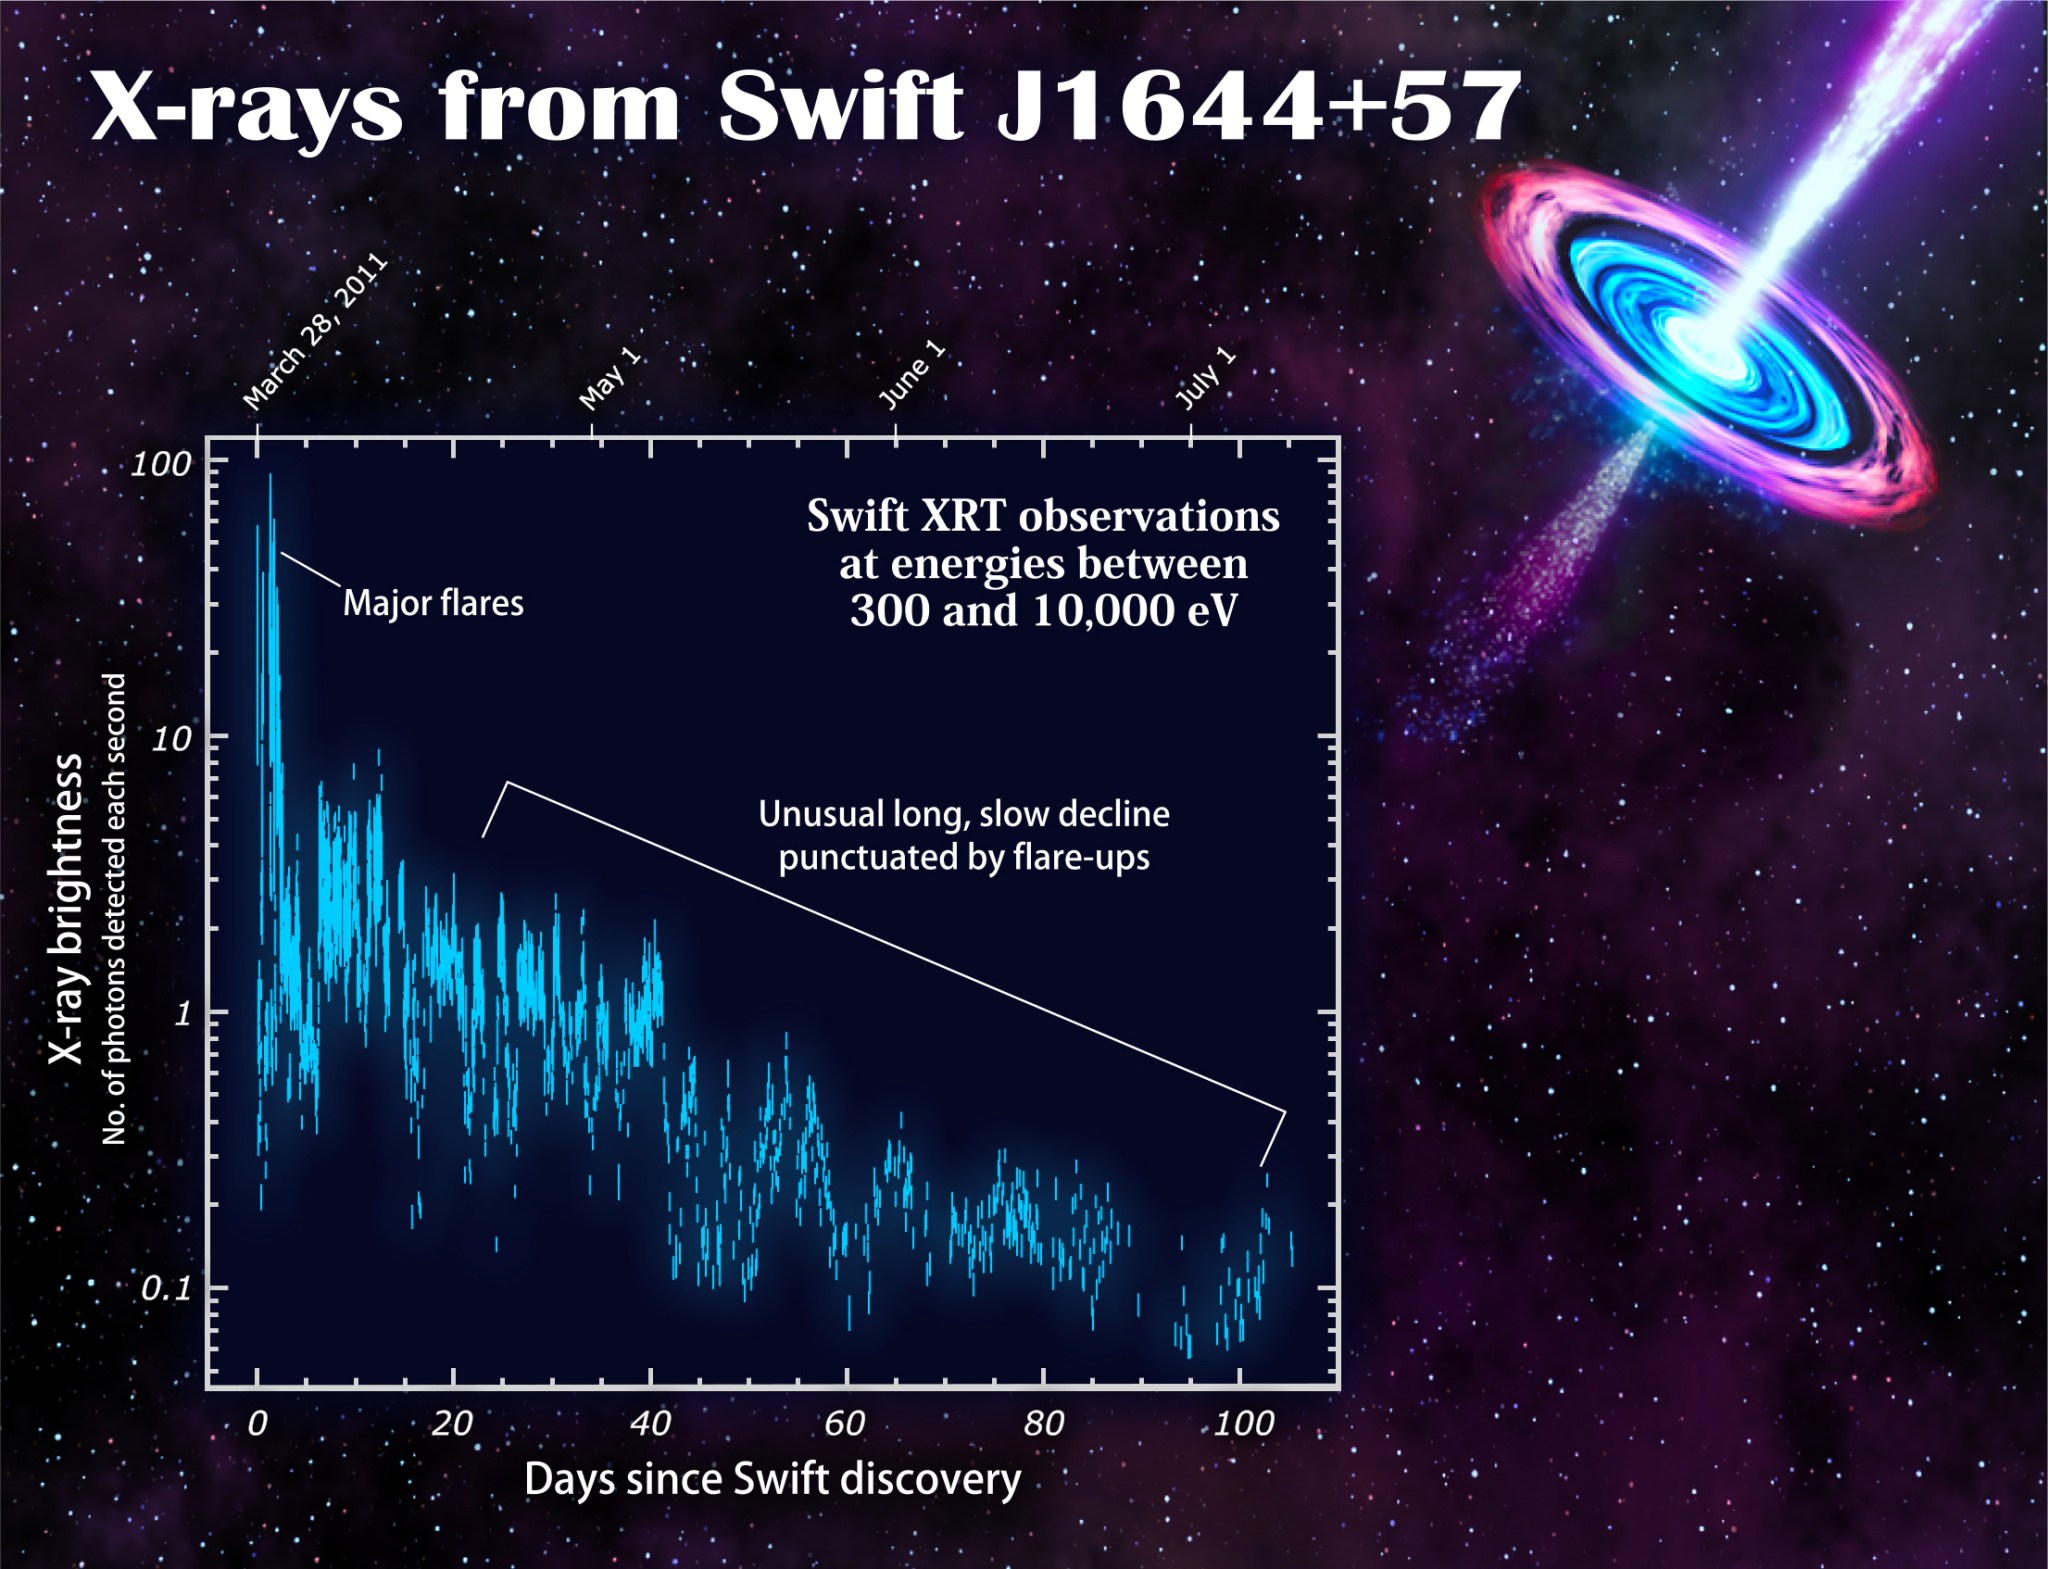 Swift continues to record high-energy flares from J1644+57 more than three months after the source's first appearance.